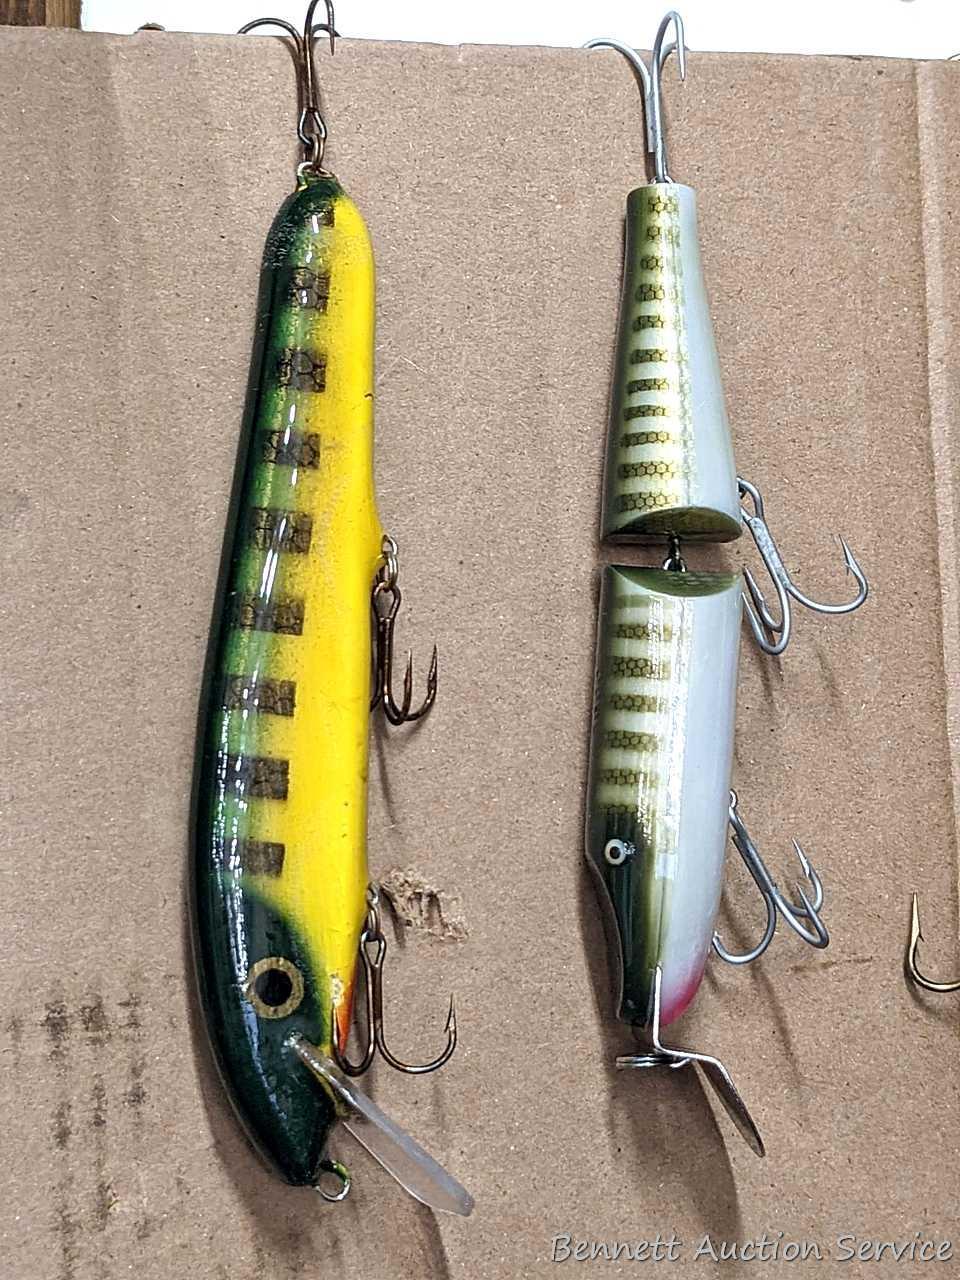 Six large fishing lures including Cisco Kid